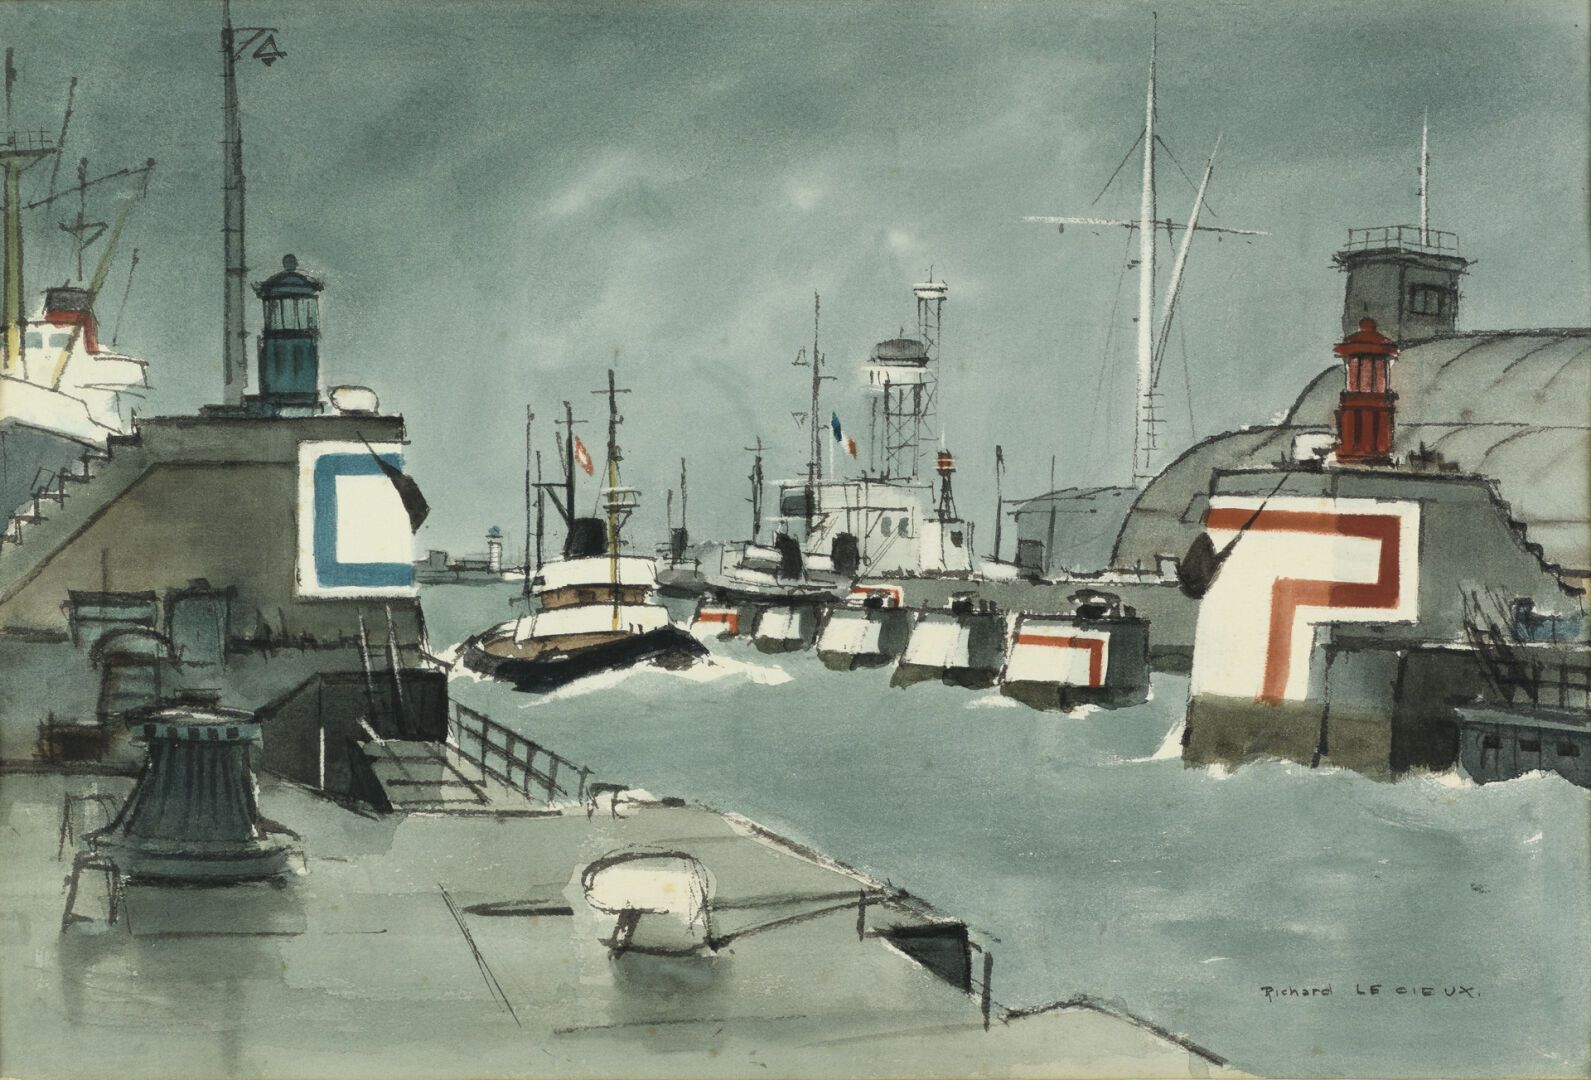 Null Richard LE CIEUX "Ships in port" watercolor, SBD, 35x52cm